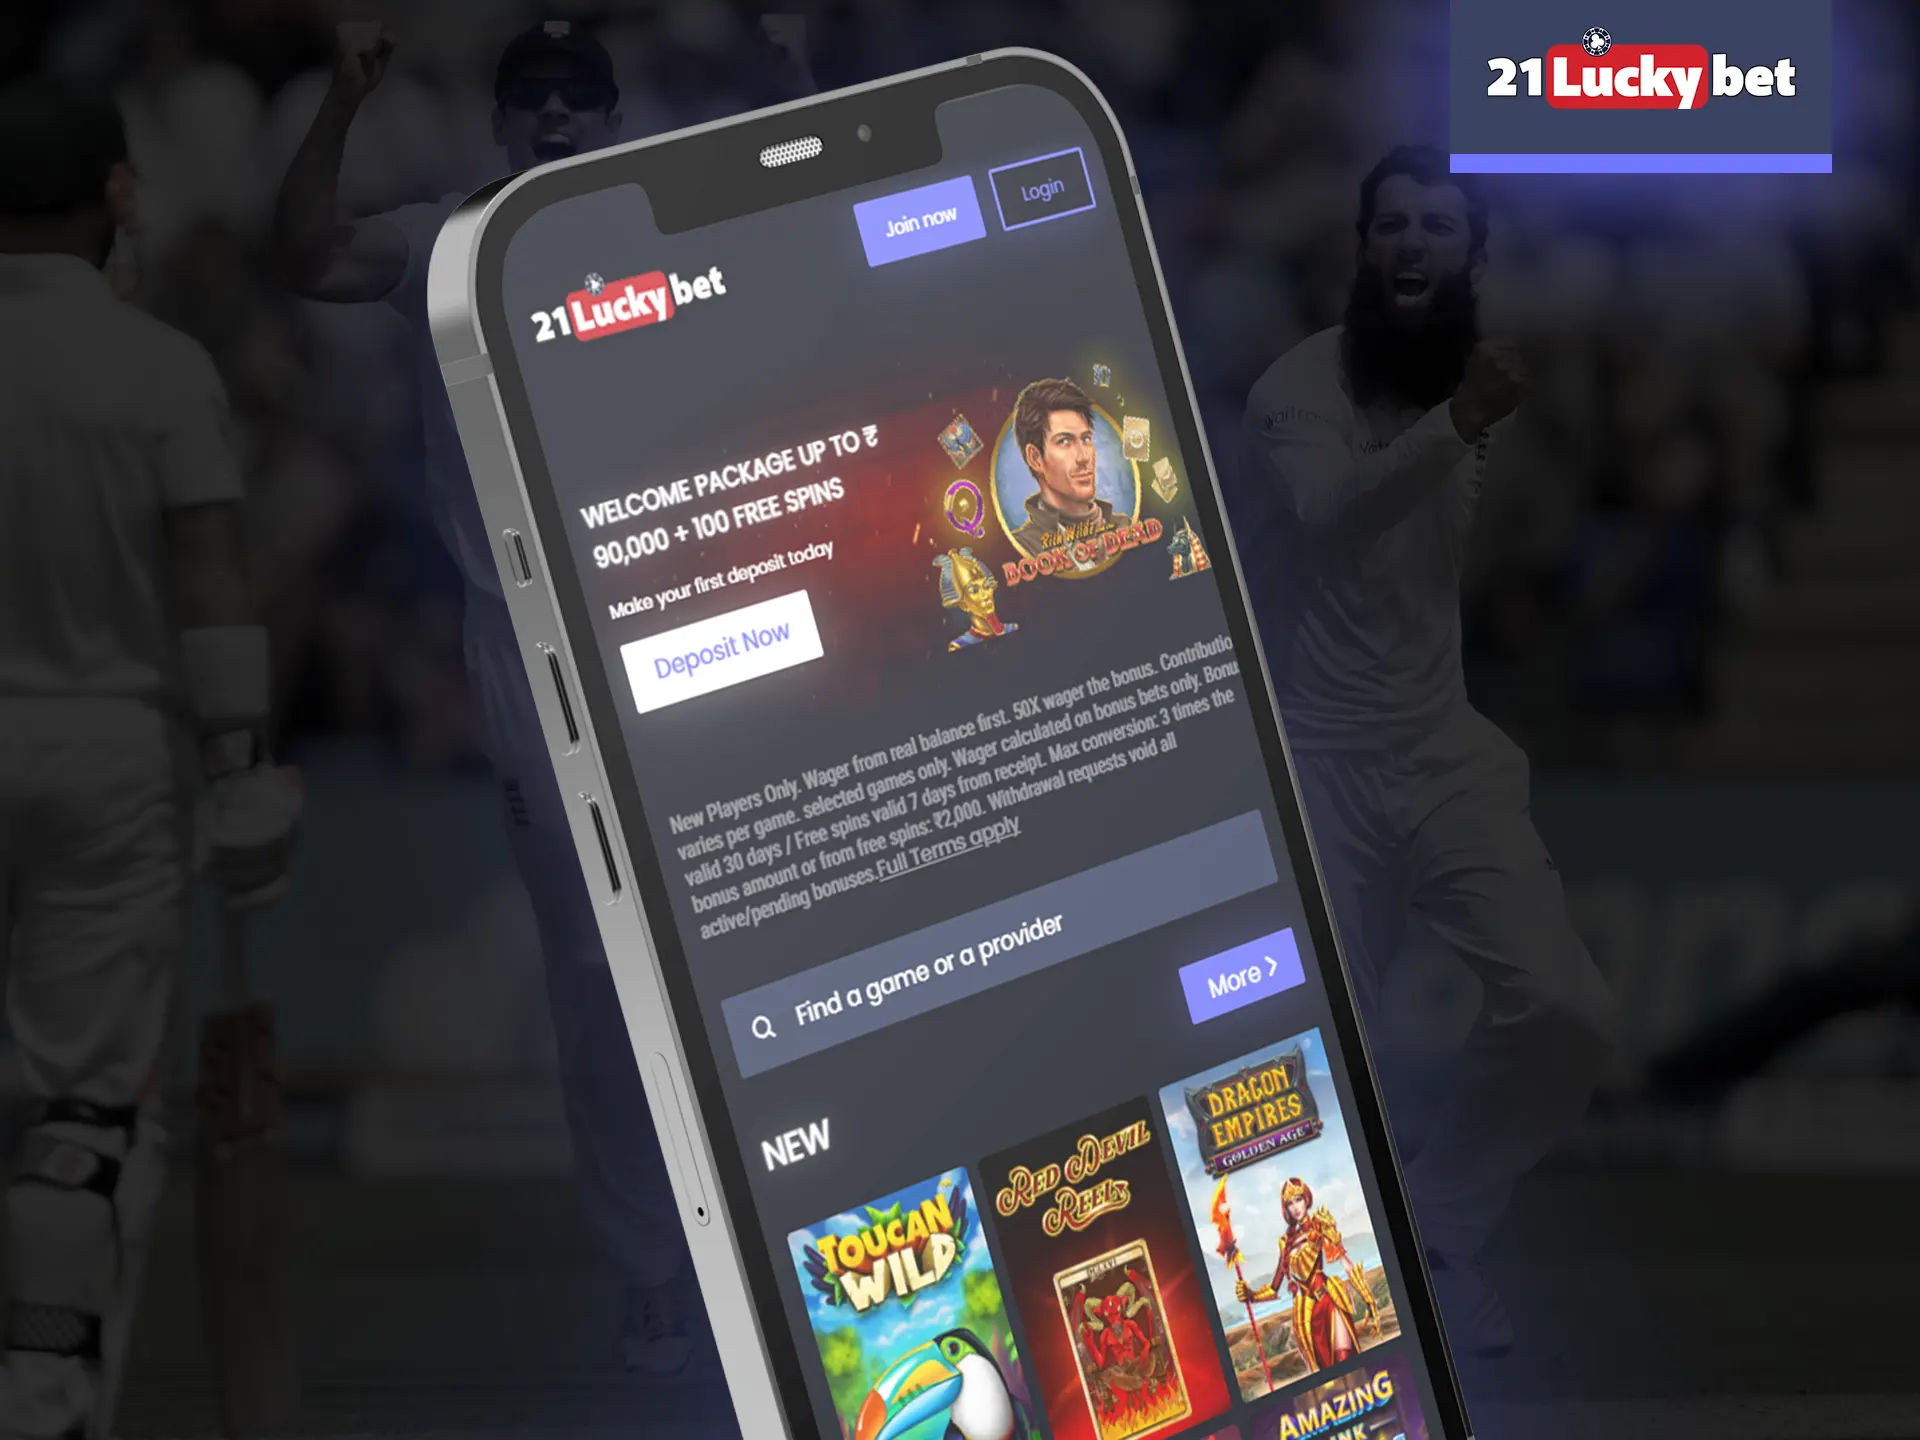 The 21luckybet app has a handy mobile browser version.